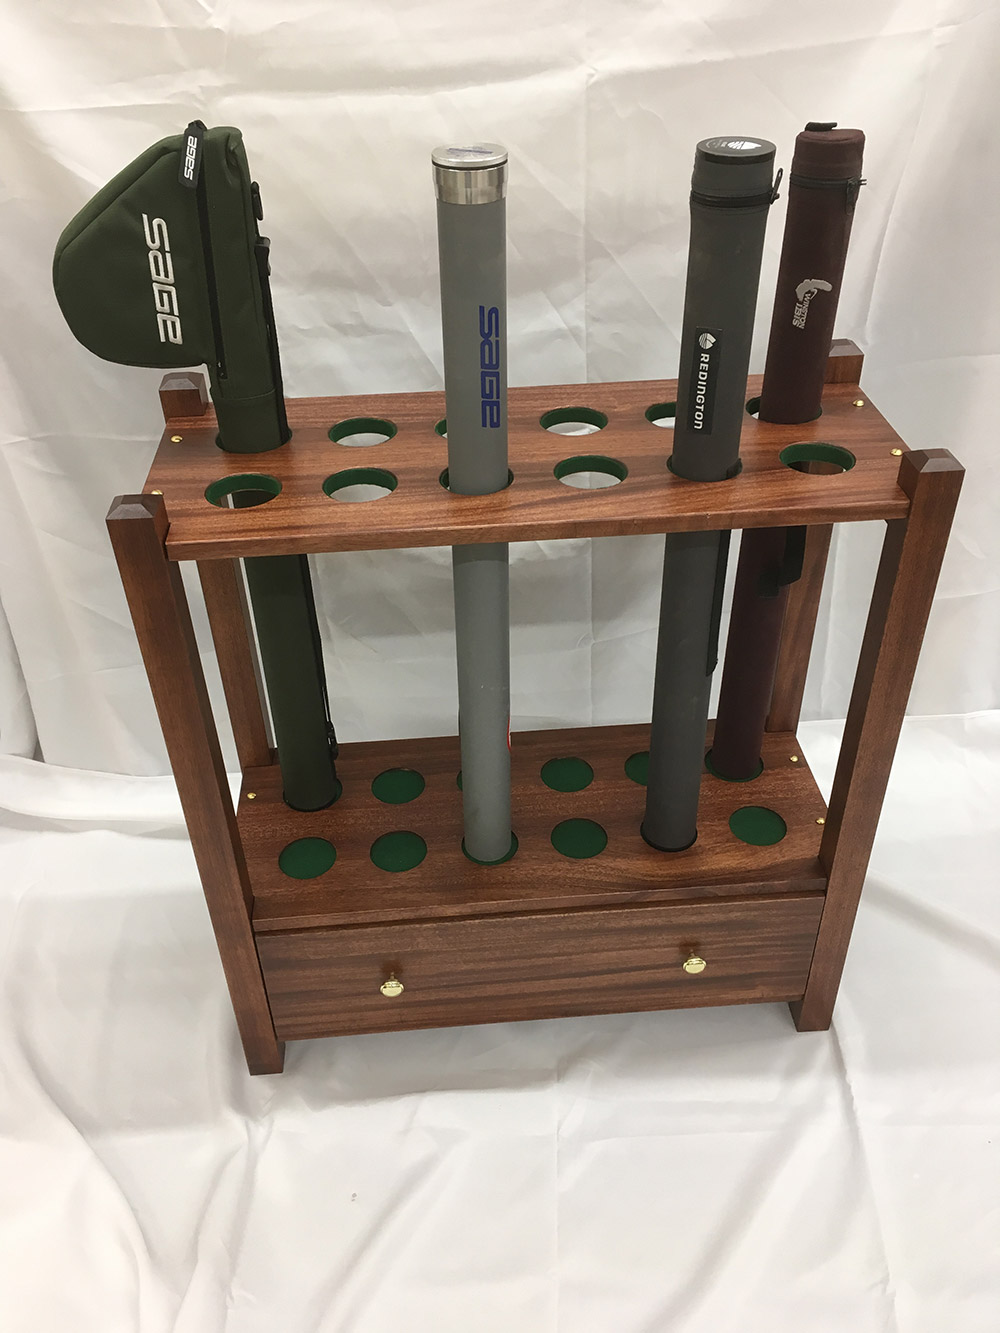 Custom Fly fishing cabinets from New Hamphire: Solid Cherry Wood